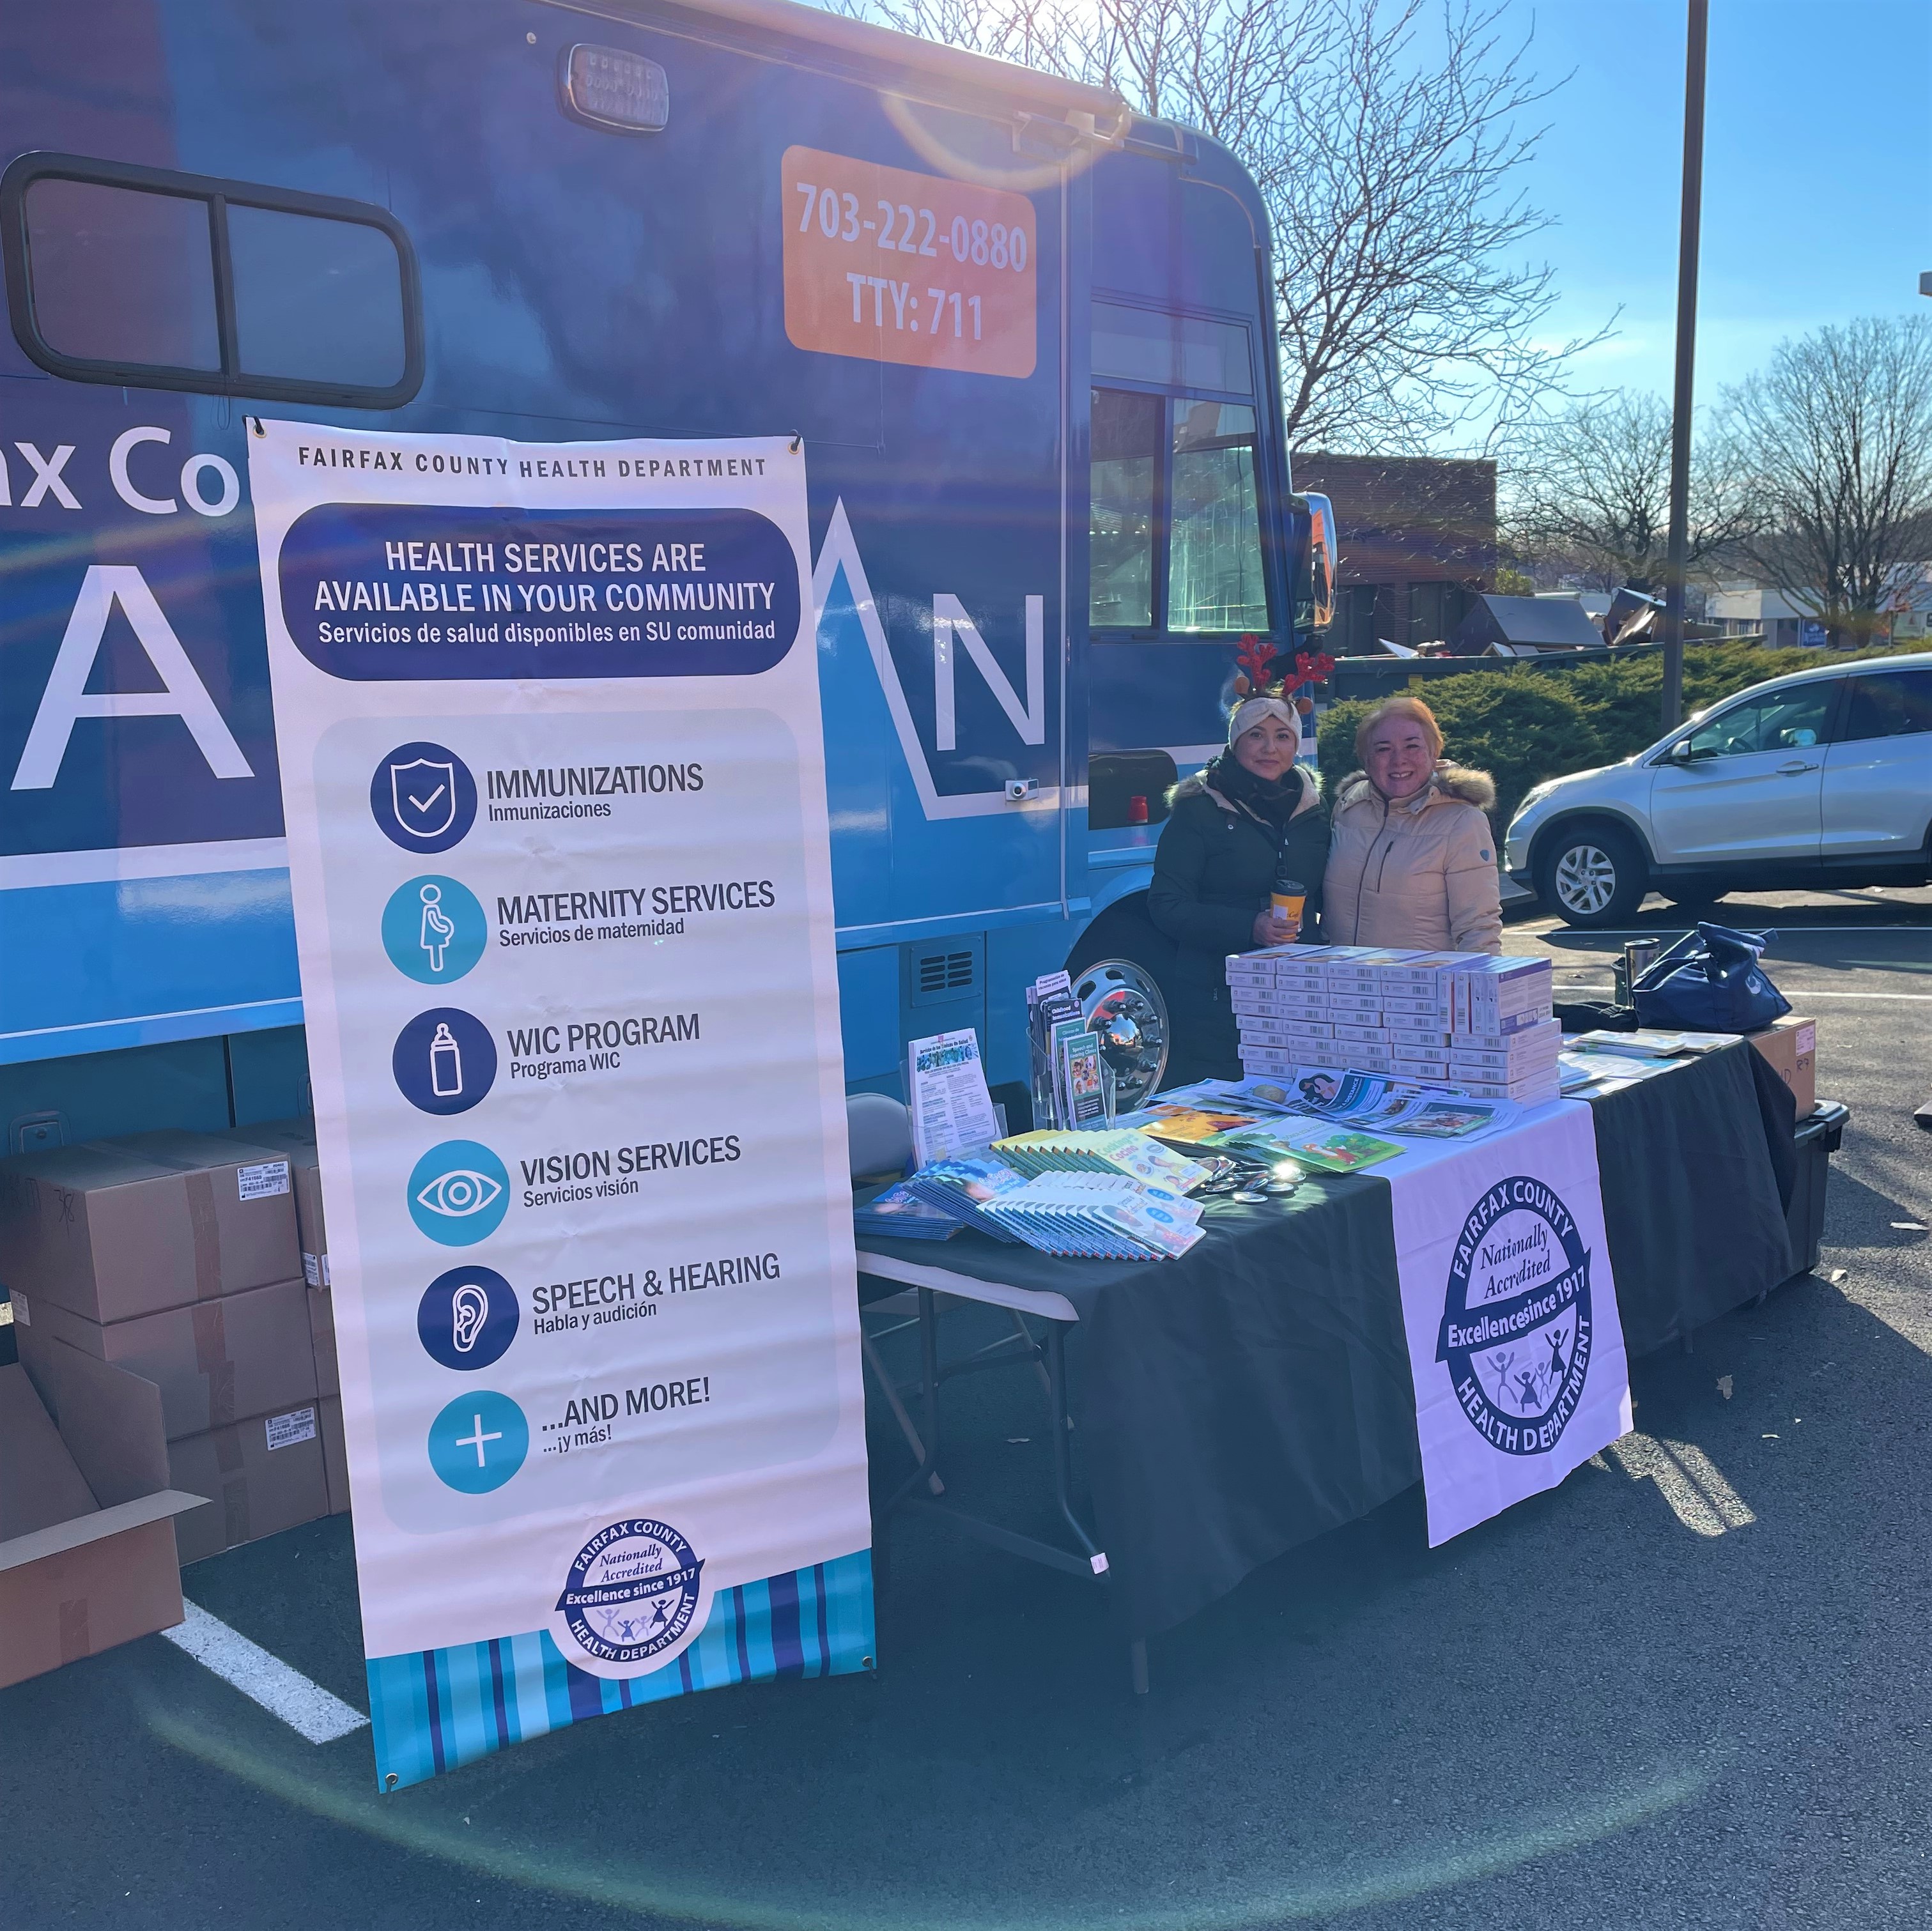 Fairfax County CareVan at an event with services sign